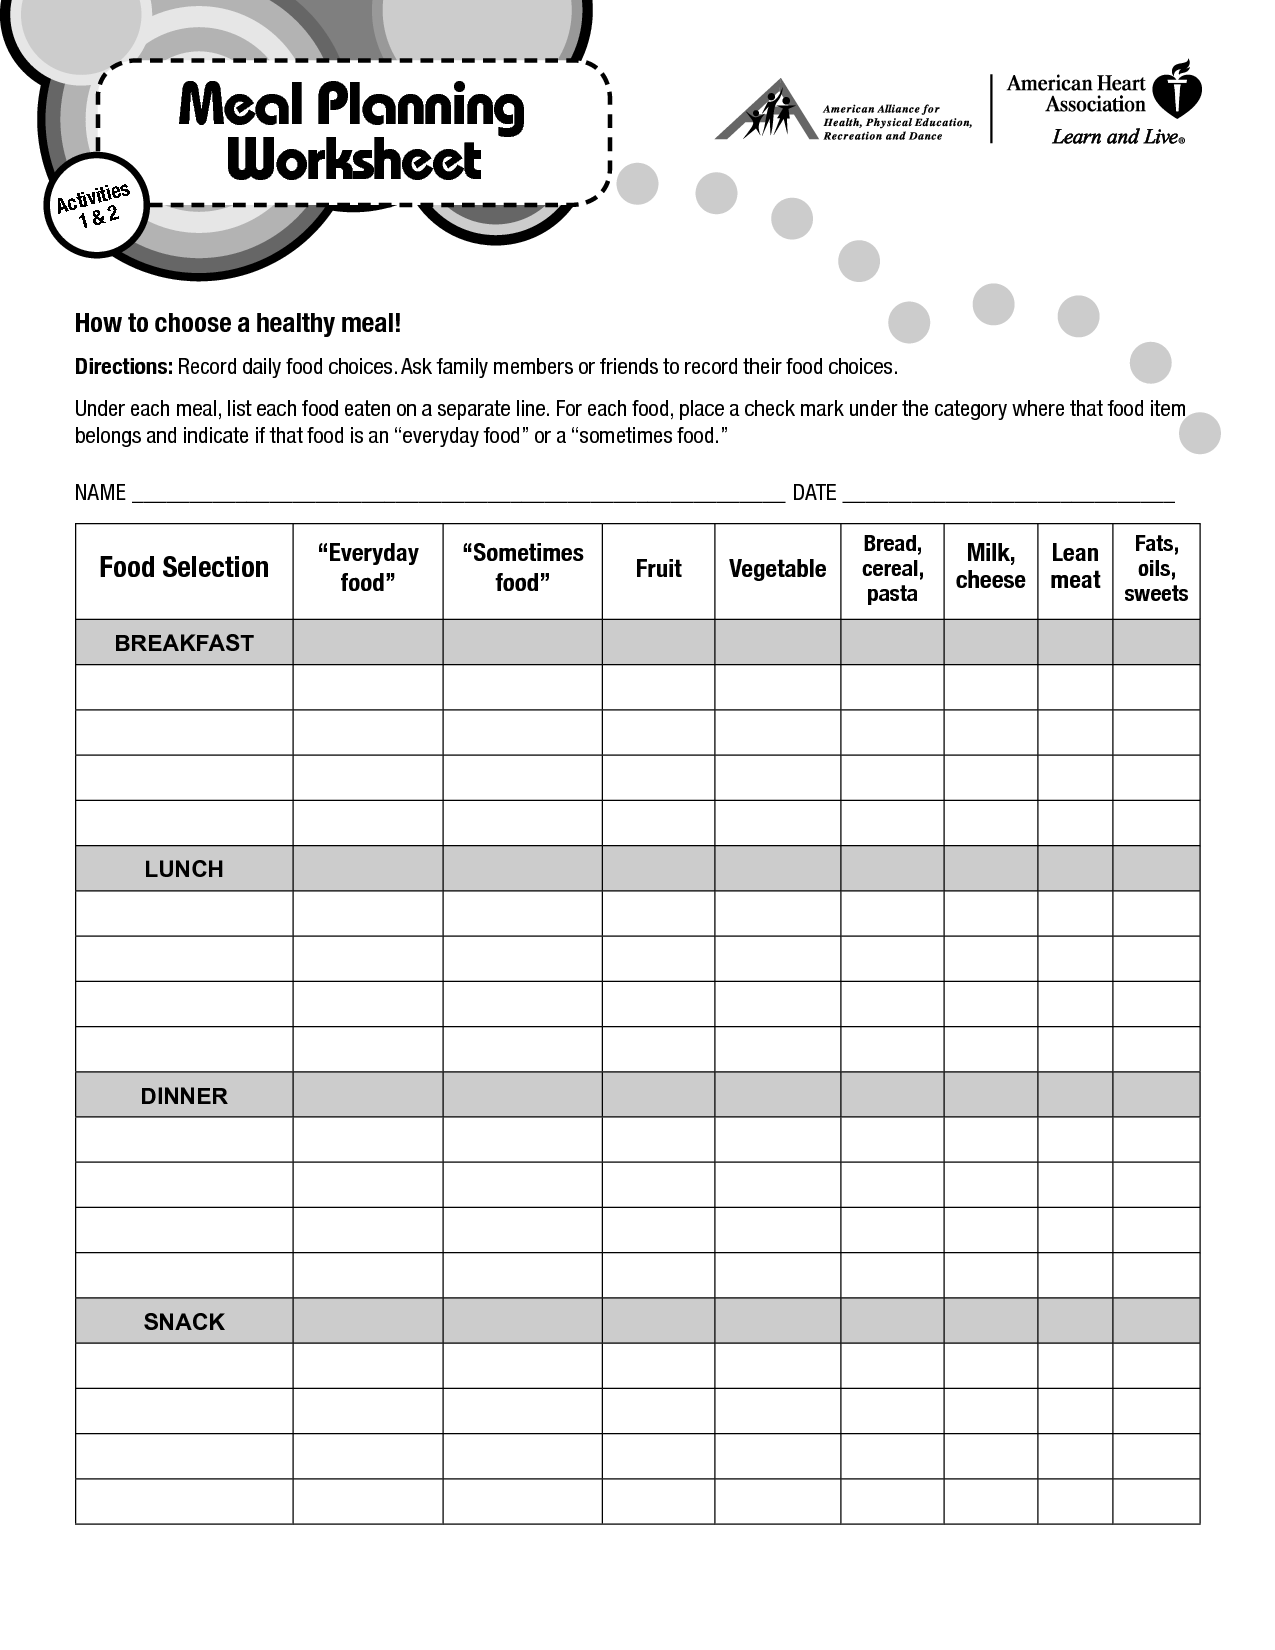 16-best-images-of-nutrition-meal-plan-worksheet-food-elimination-diet-diary-template-meal